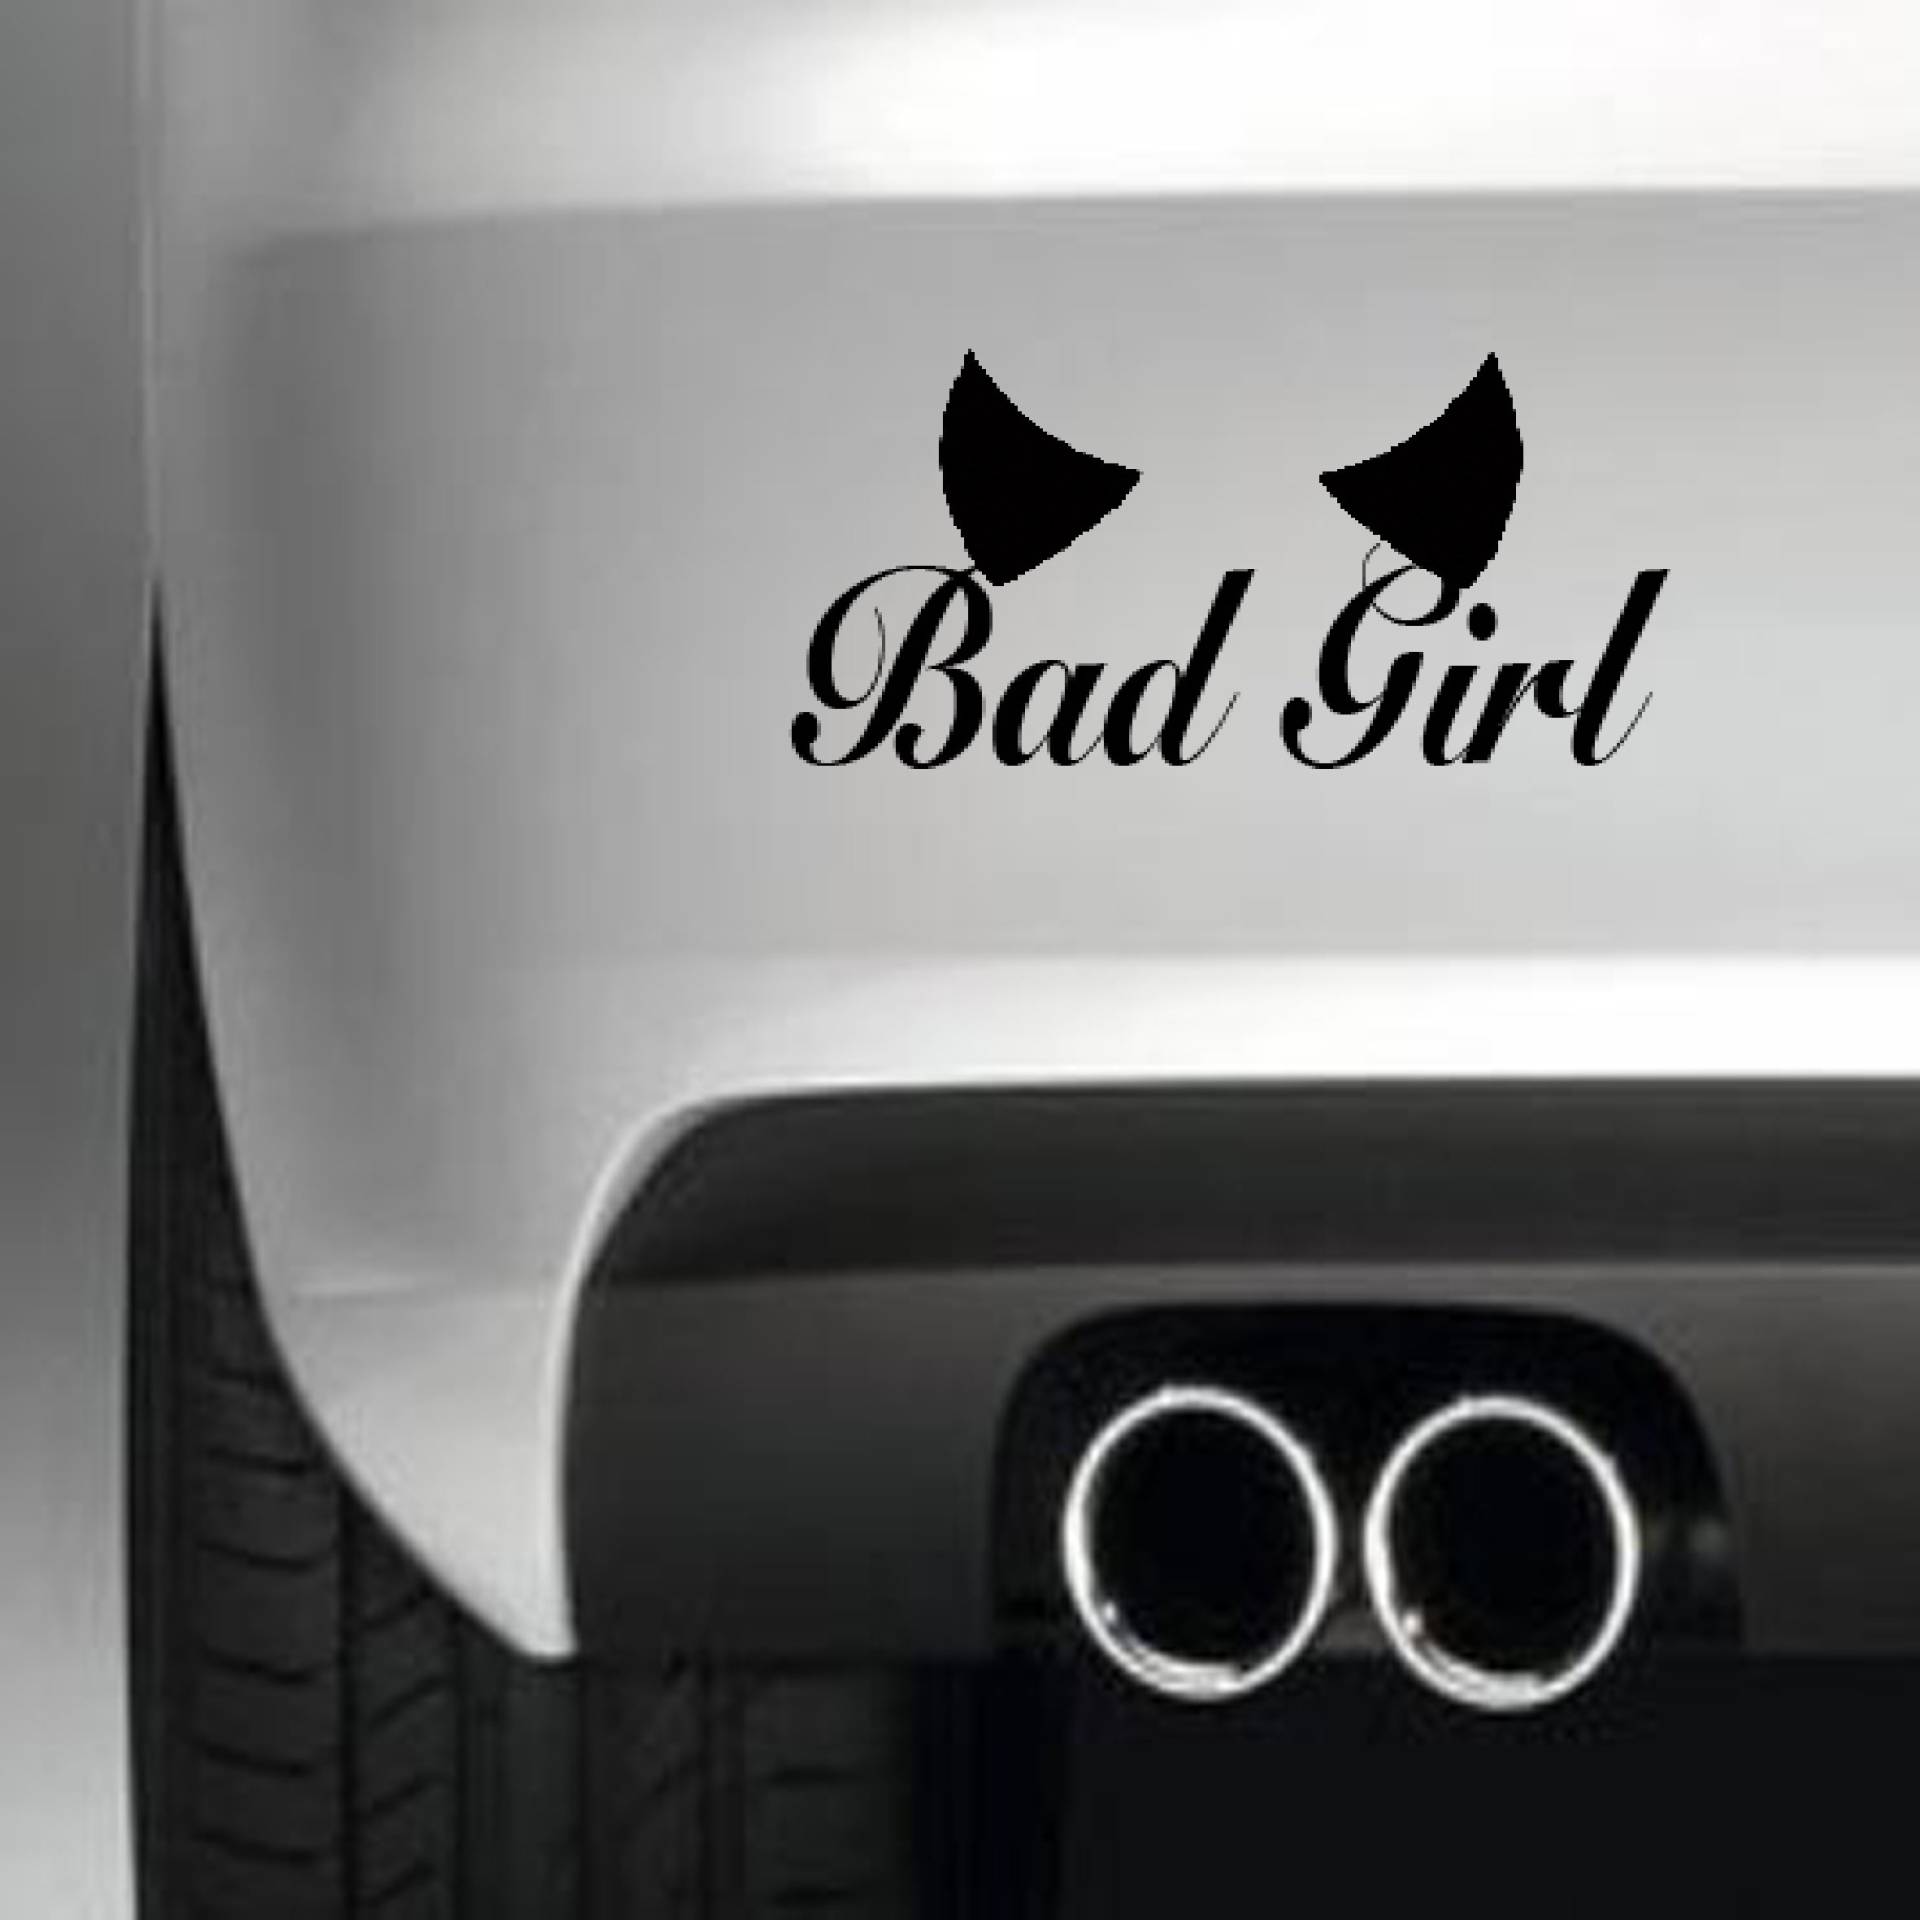 South Coast Stickers Bad Girl with Horns Inside Sticker Funny Bumper Sticker CAR Van 4X4 Window PAINTWORK Decal Euro Left Hand Drive von South Coast Stickers